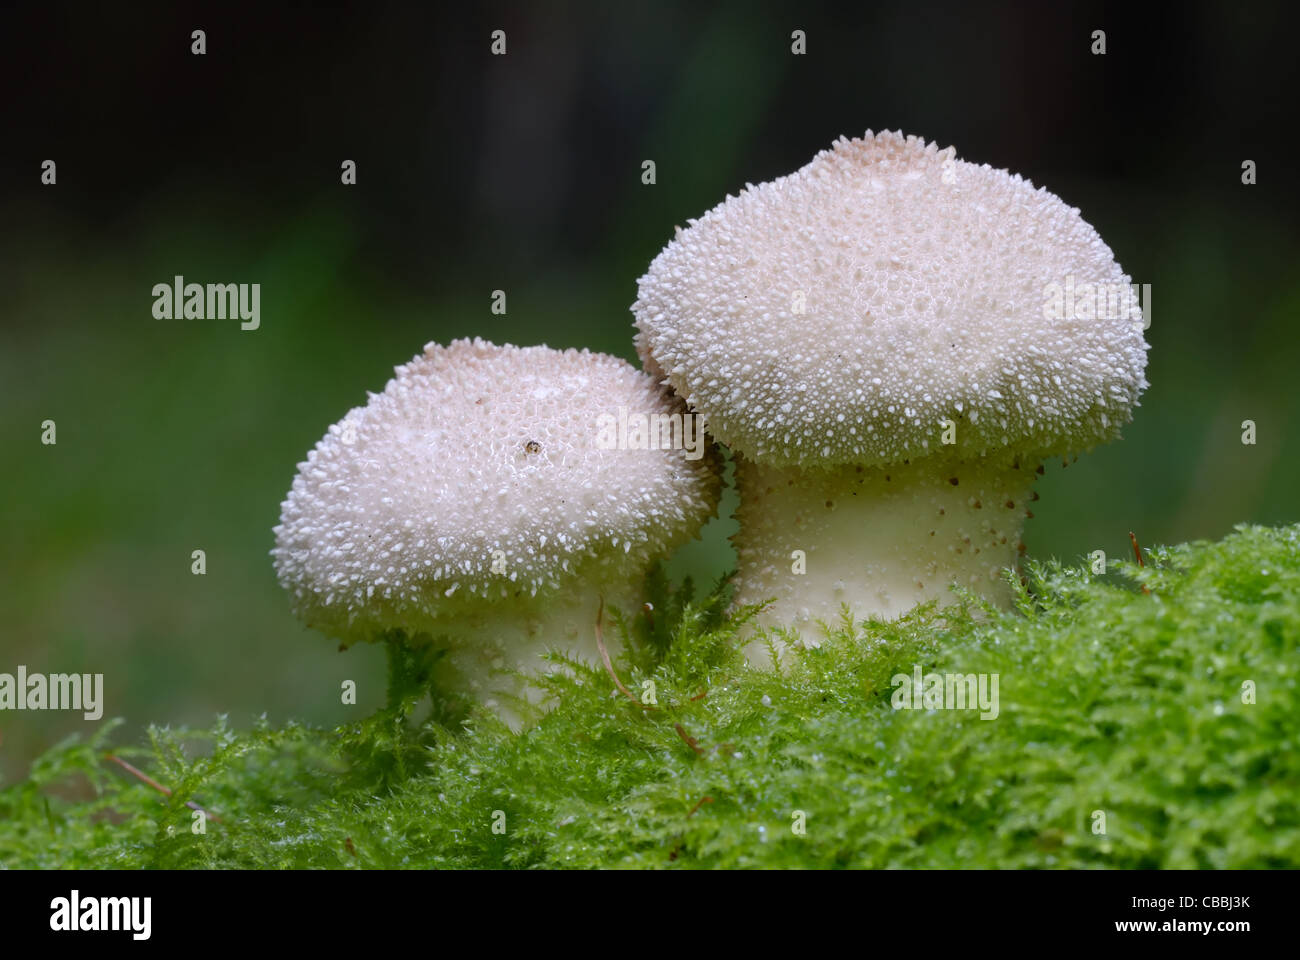 A Macro portrait of two common puffballs growing out of moss in an oxfordshire woodland Stock Photo